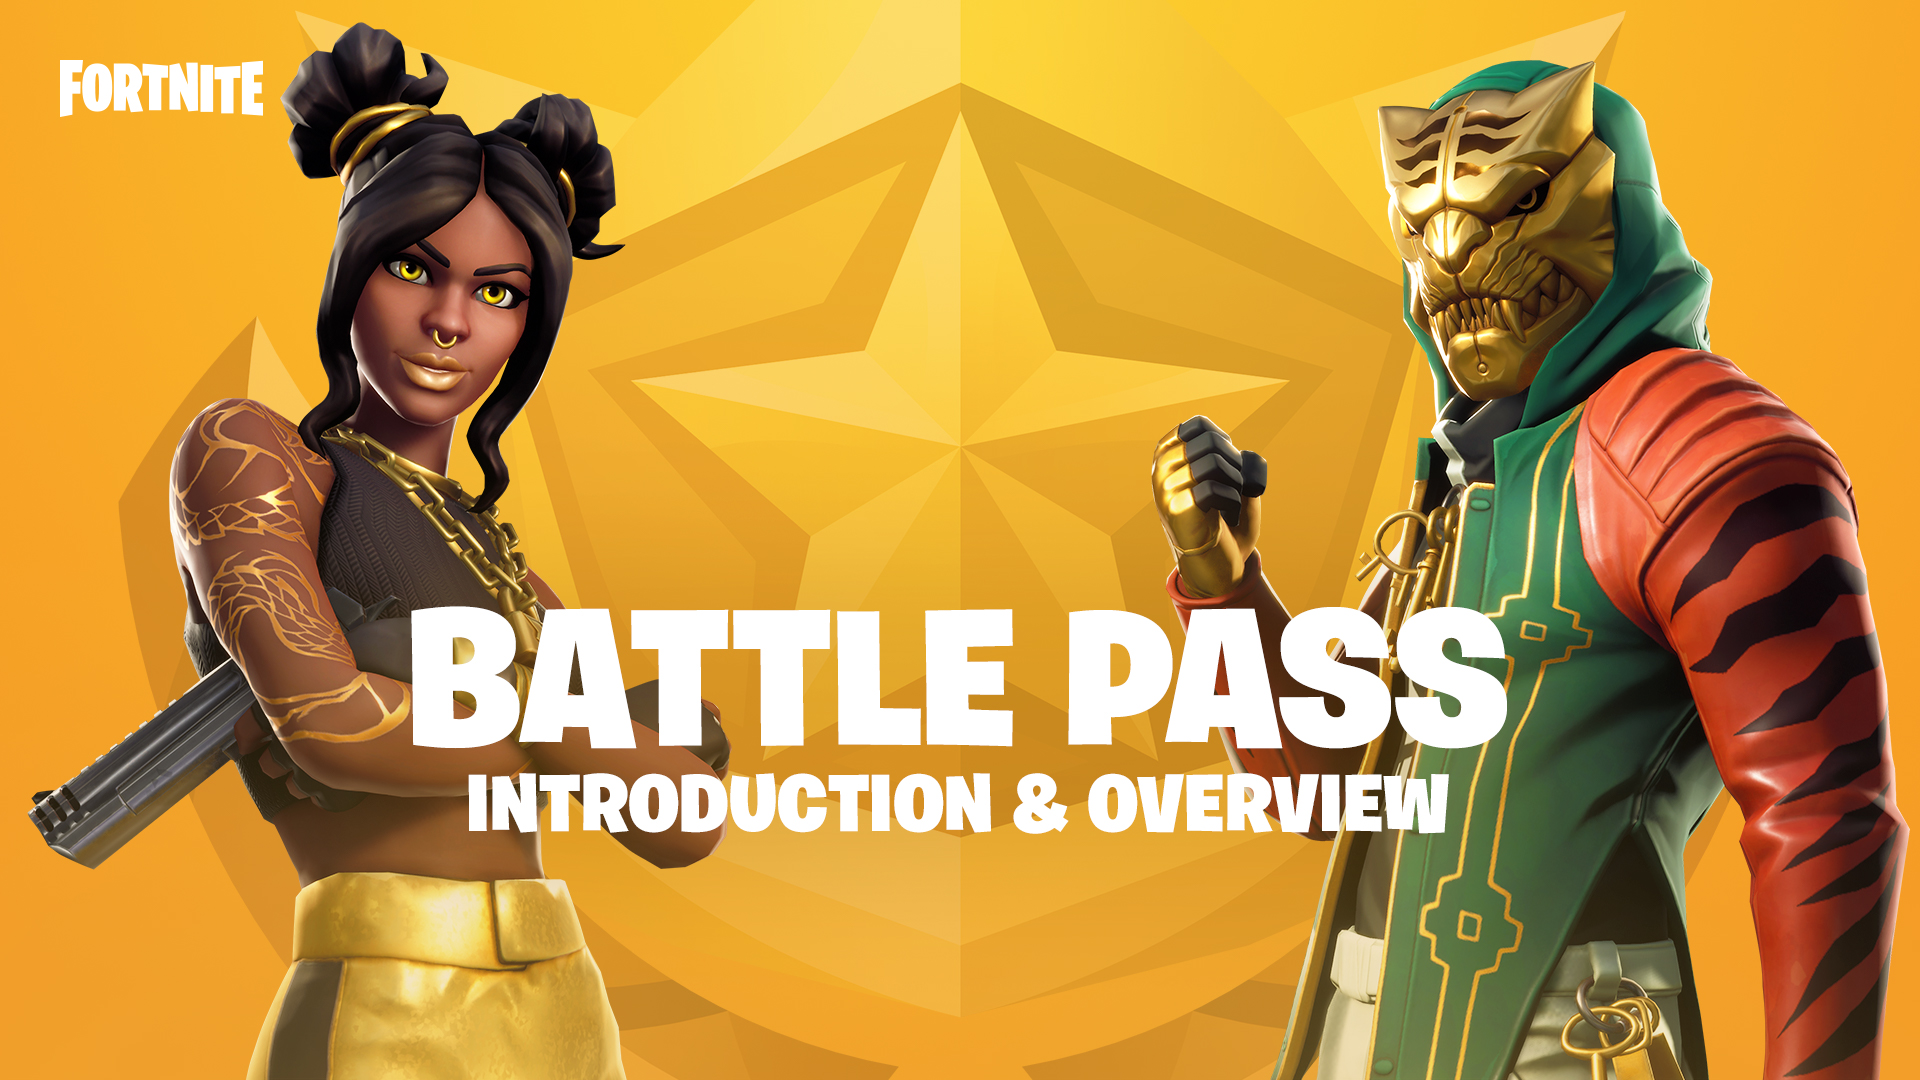 play fortnite battle pass introduction overview with two characters on an orange star background - fortnite free download xbox